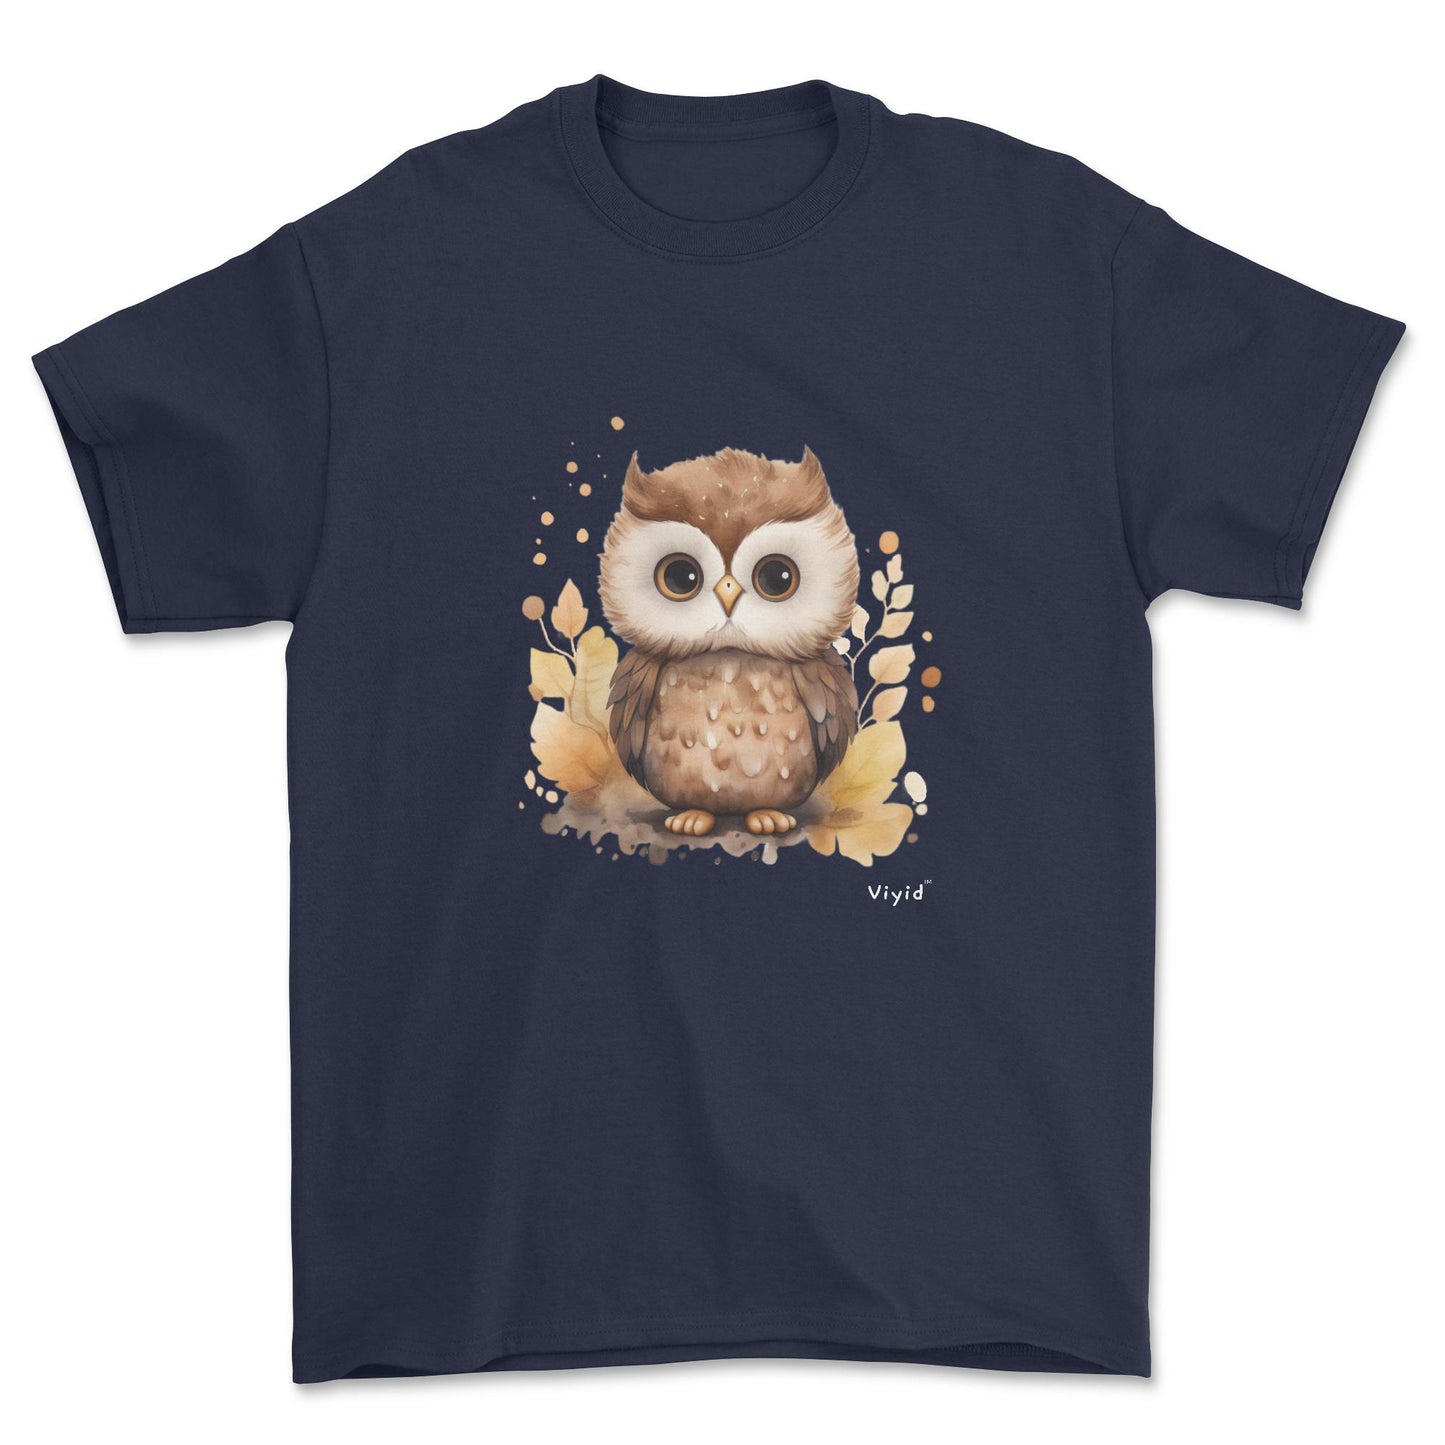 nocturnal owl adult t-shirt navy